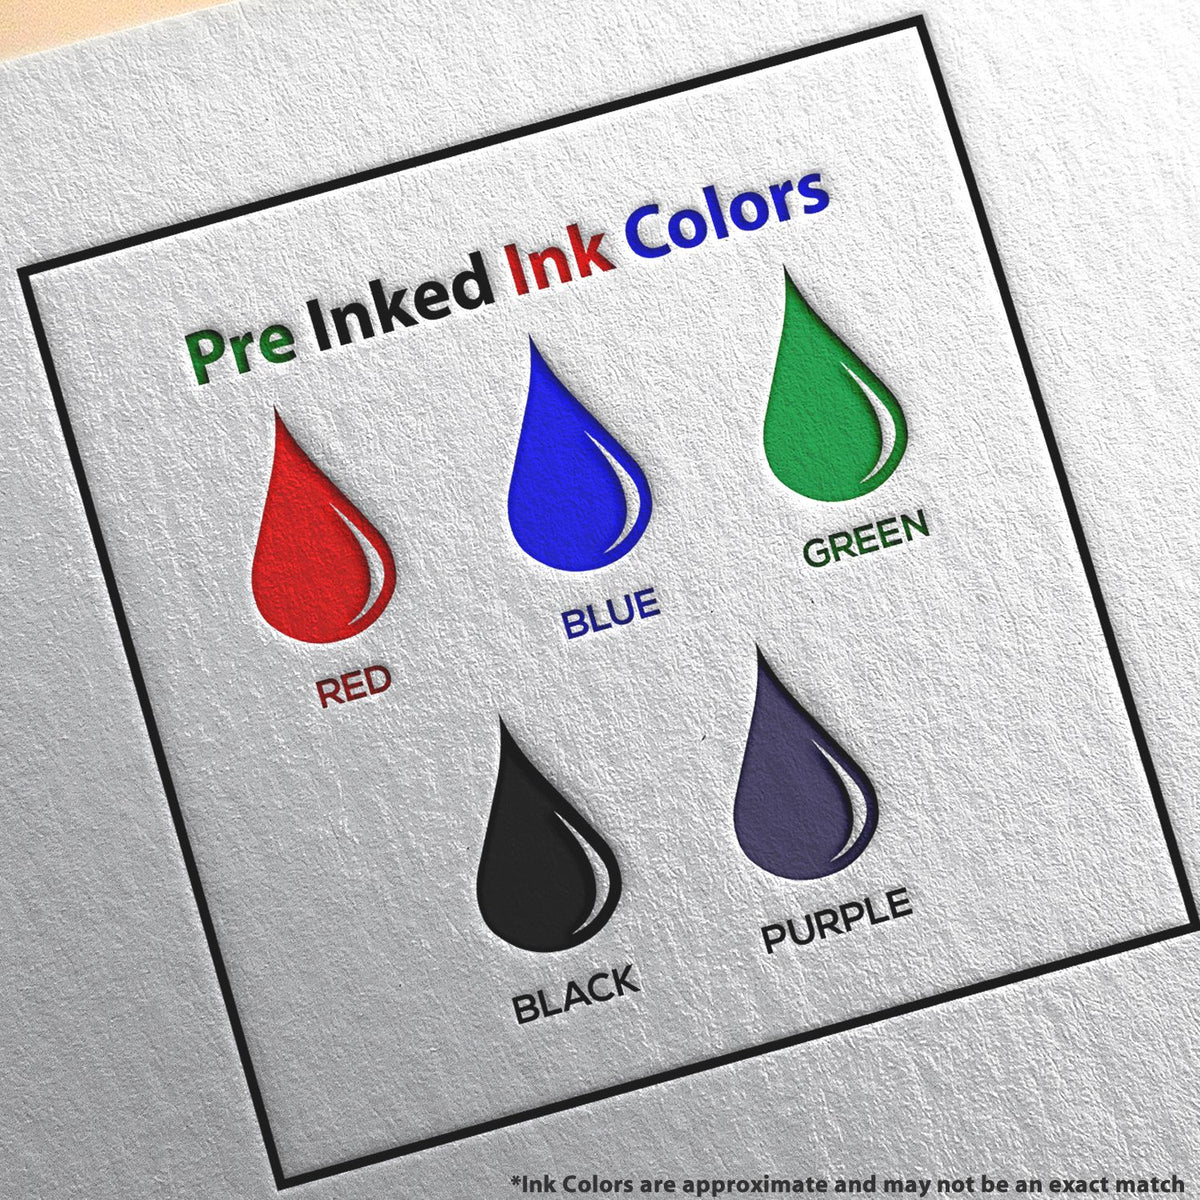 A picture showing the different ink colors or hues available for the Slim Pre-Inked Minnesota Architect Seal Stamp product.